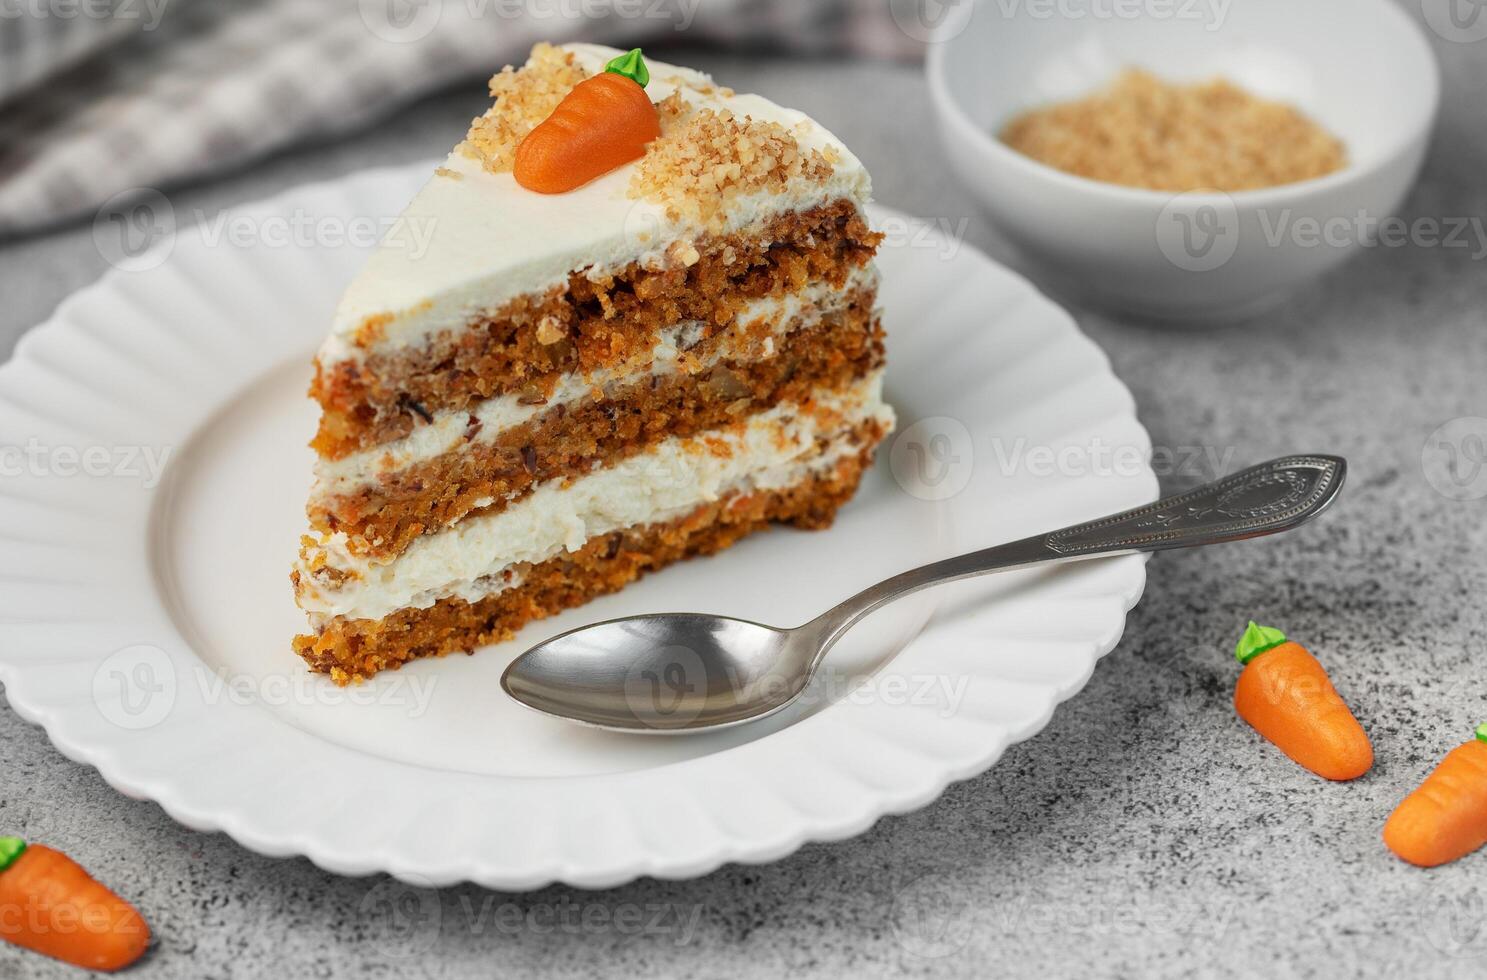 Homemade carrot cake made with walnuts, iced with cream cheese. Sweet dessert. photo